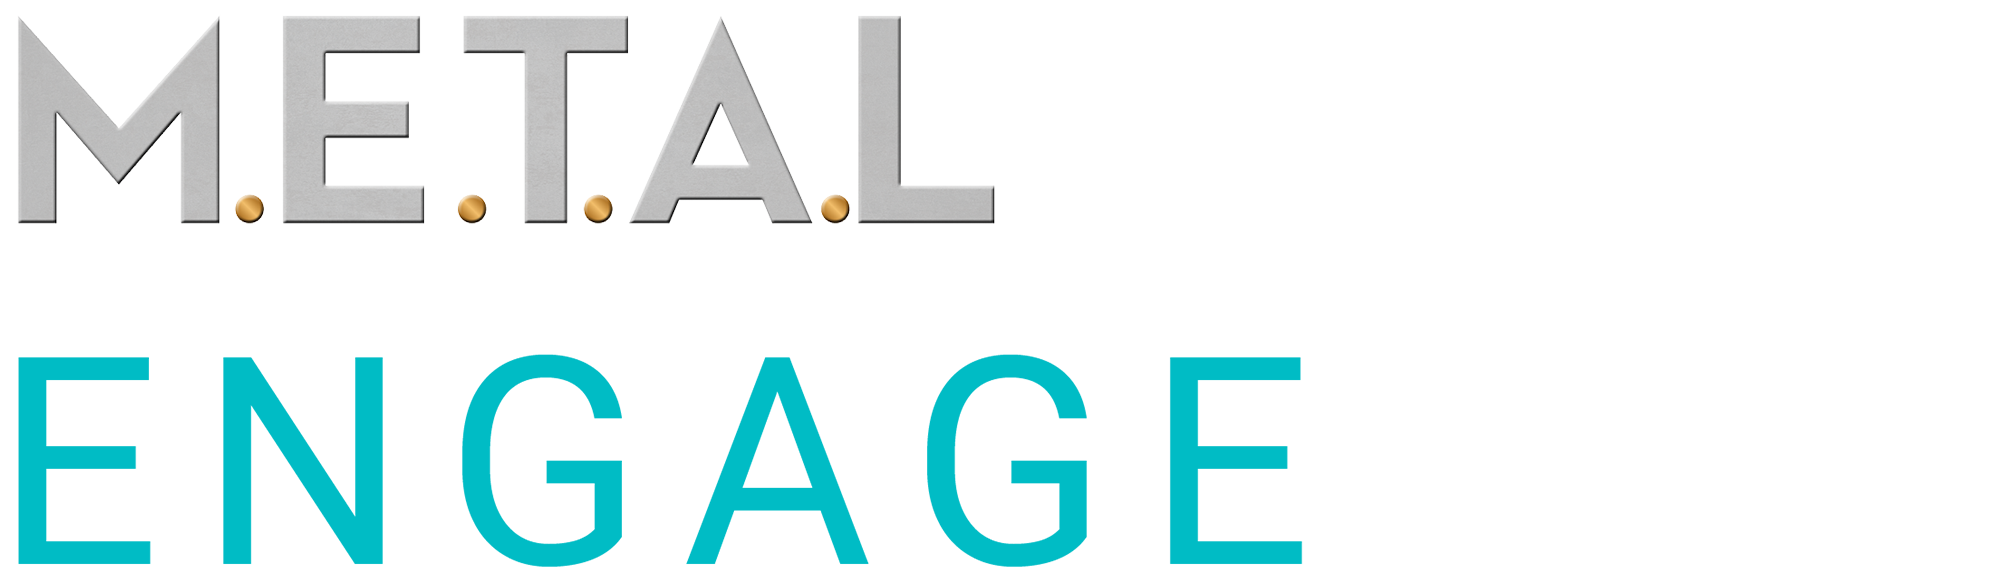 METAL Category - Engage - Light